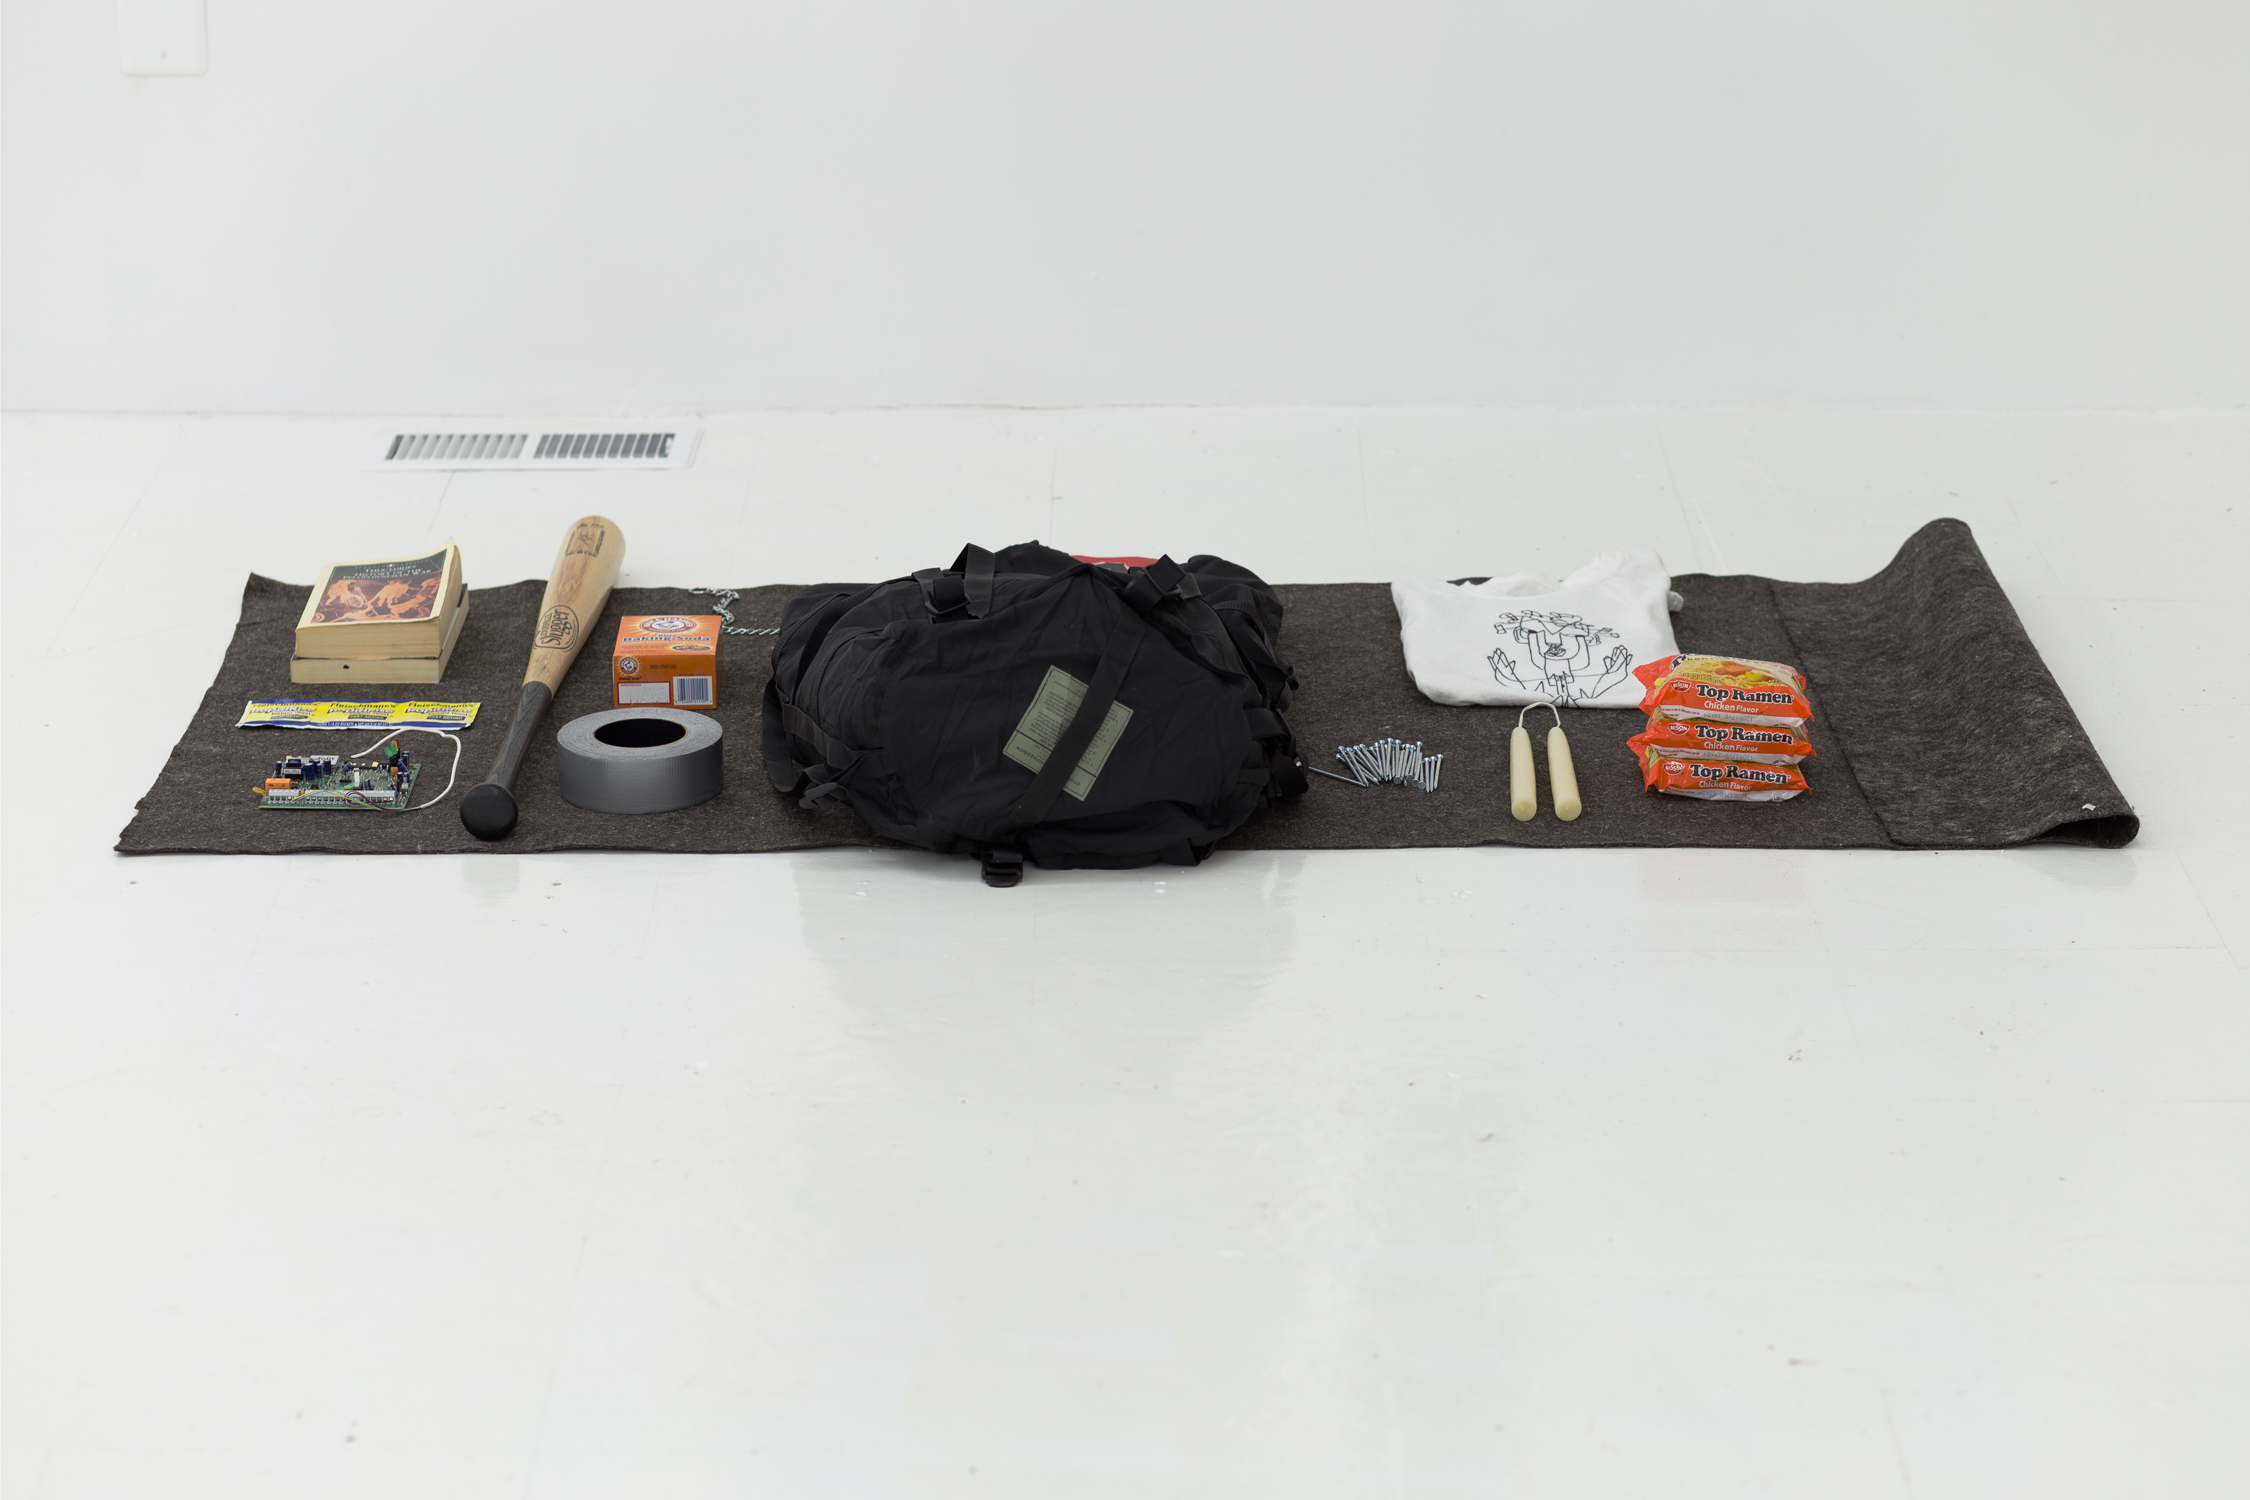 A piece of gray felt lies on the floor, spread with an assembly of items and a black backpack